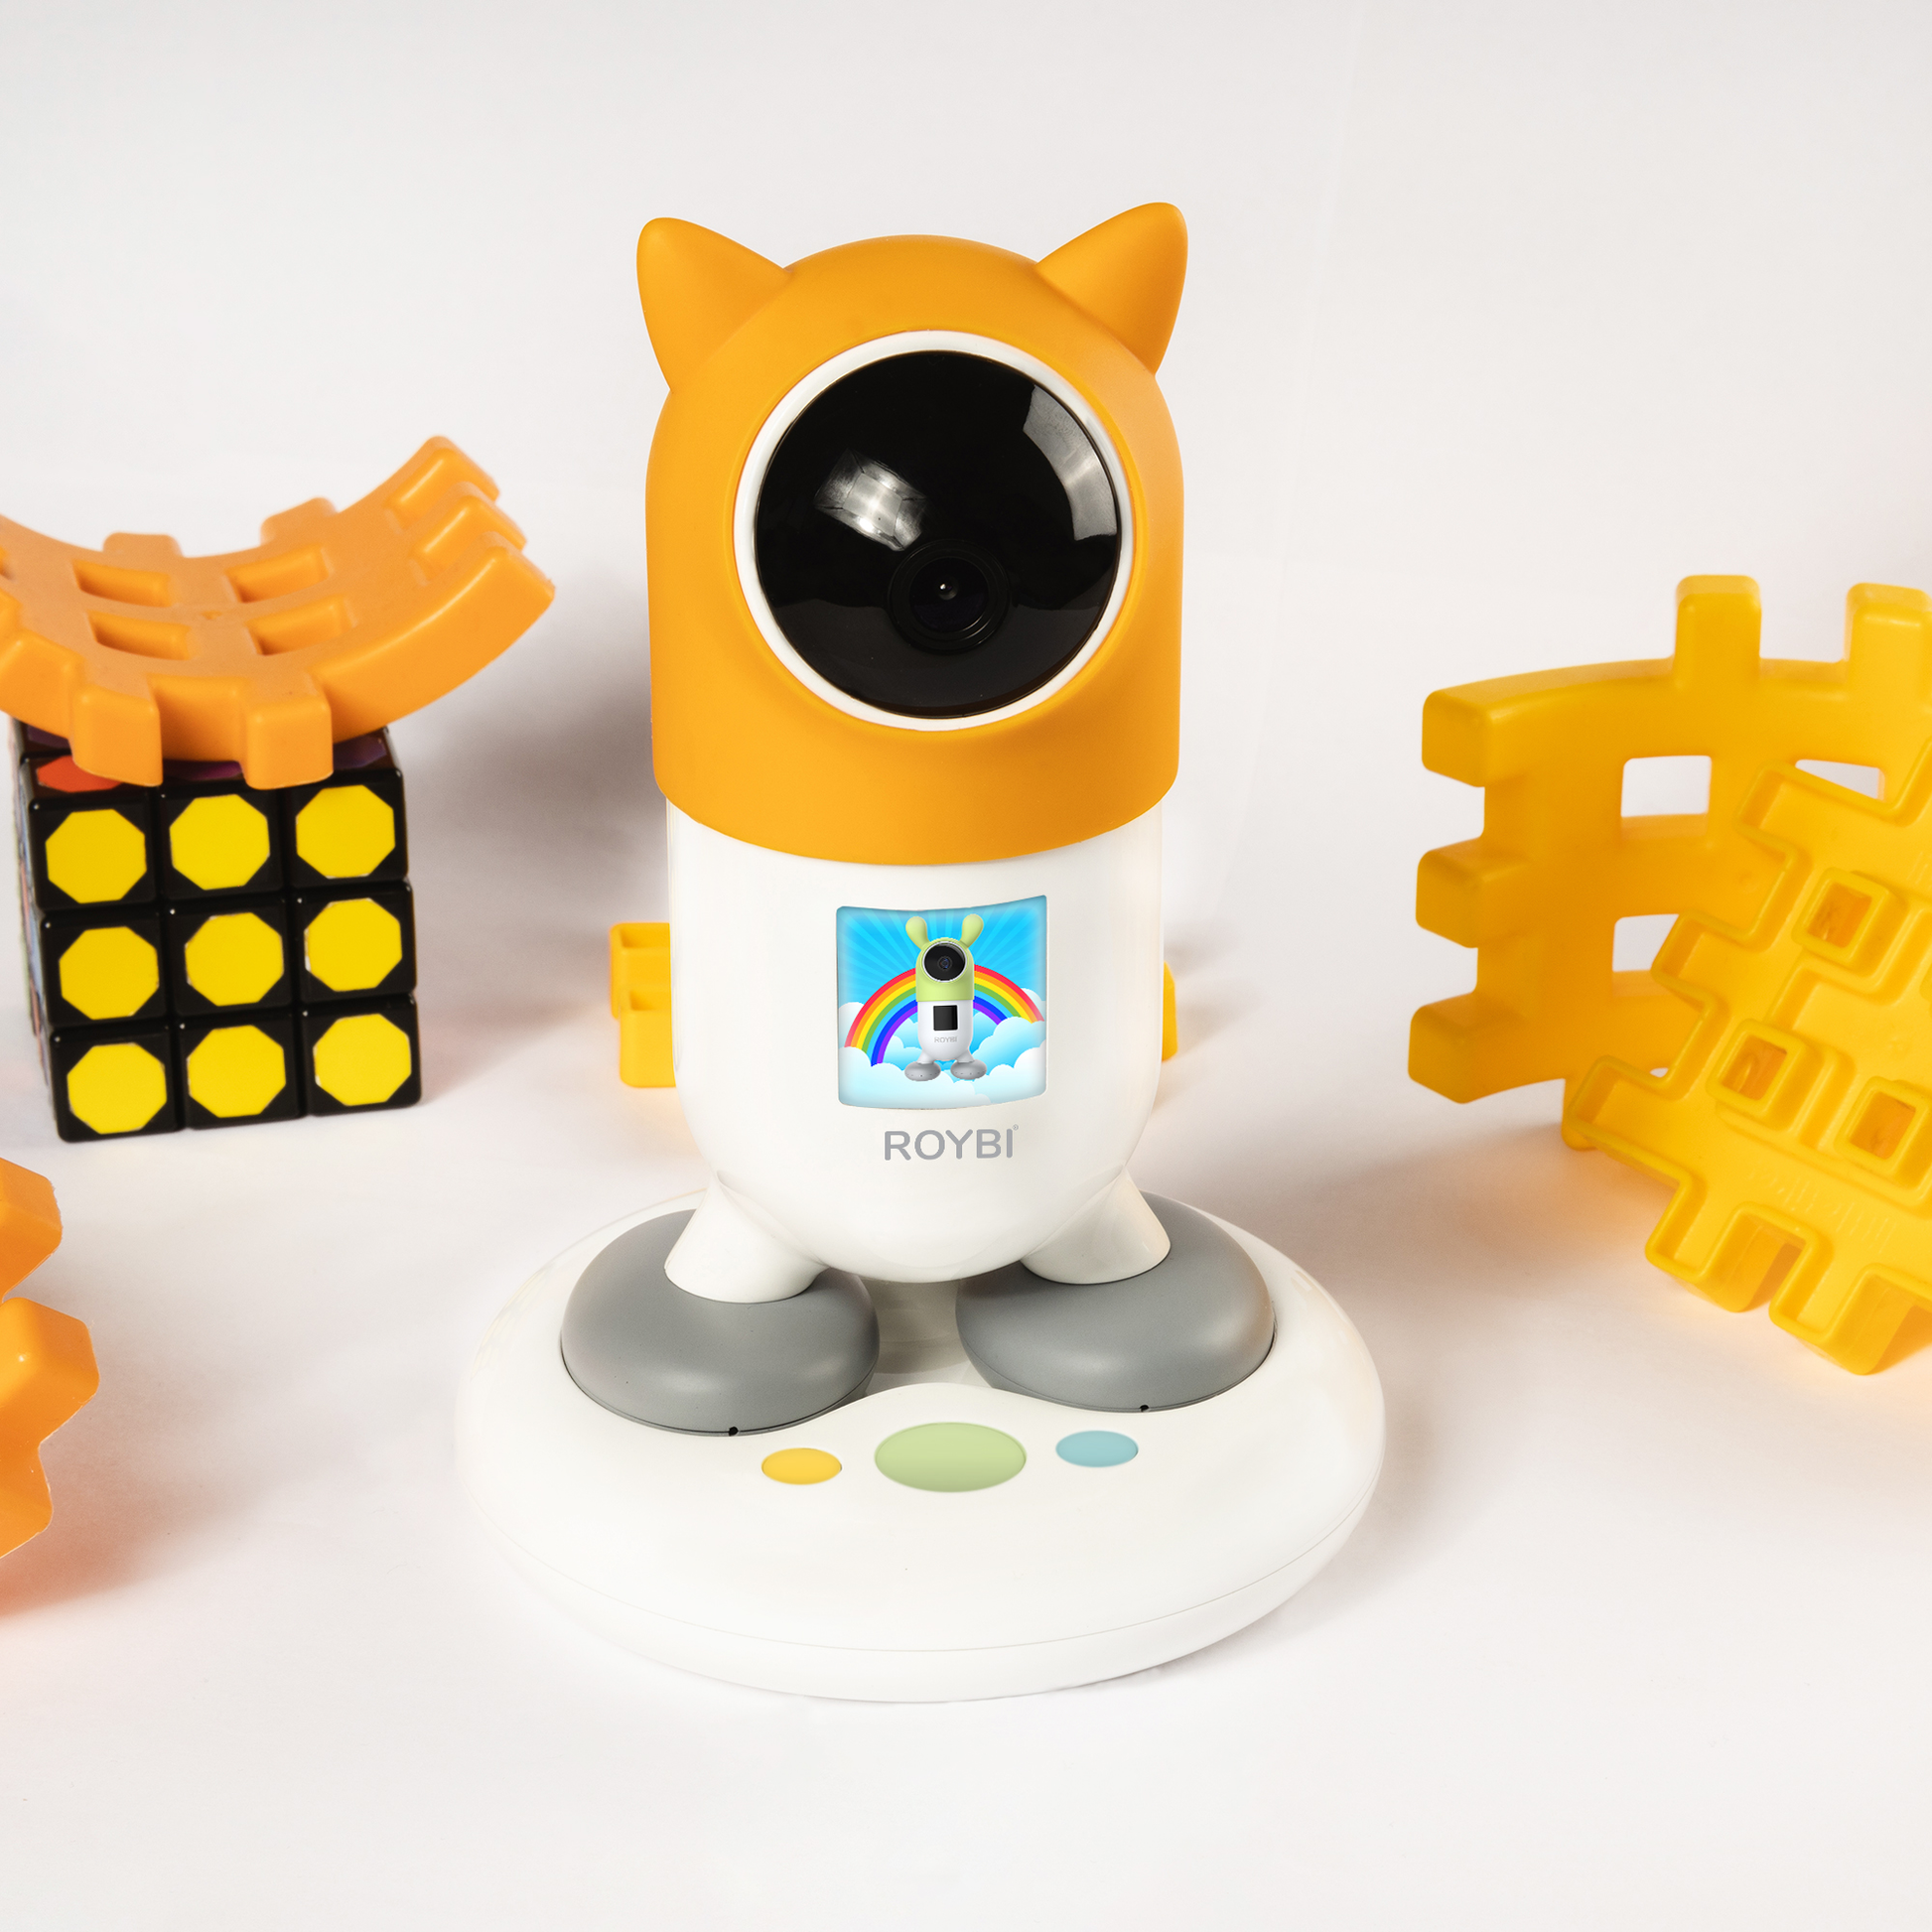 Roybi Robot: Interactive Educational Toy for Kids with STEM Learning and Privacy Protection - ToylandEU